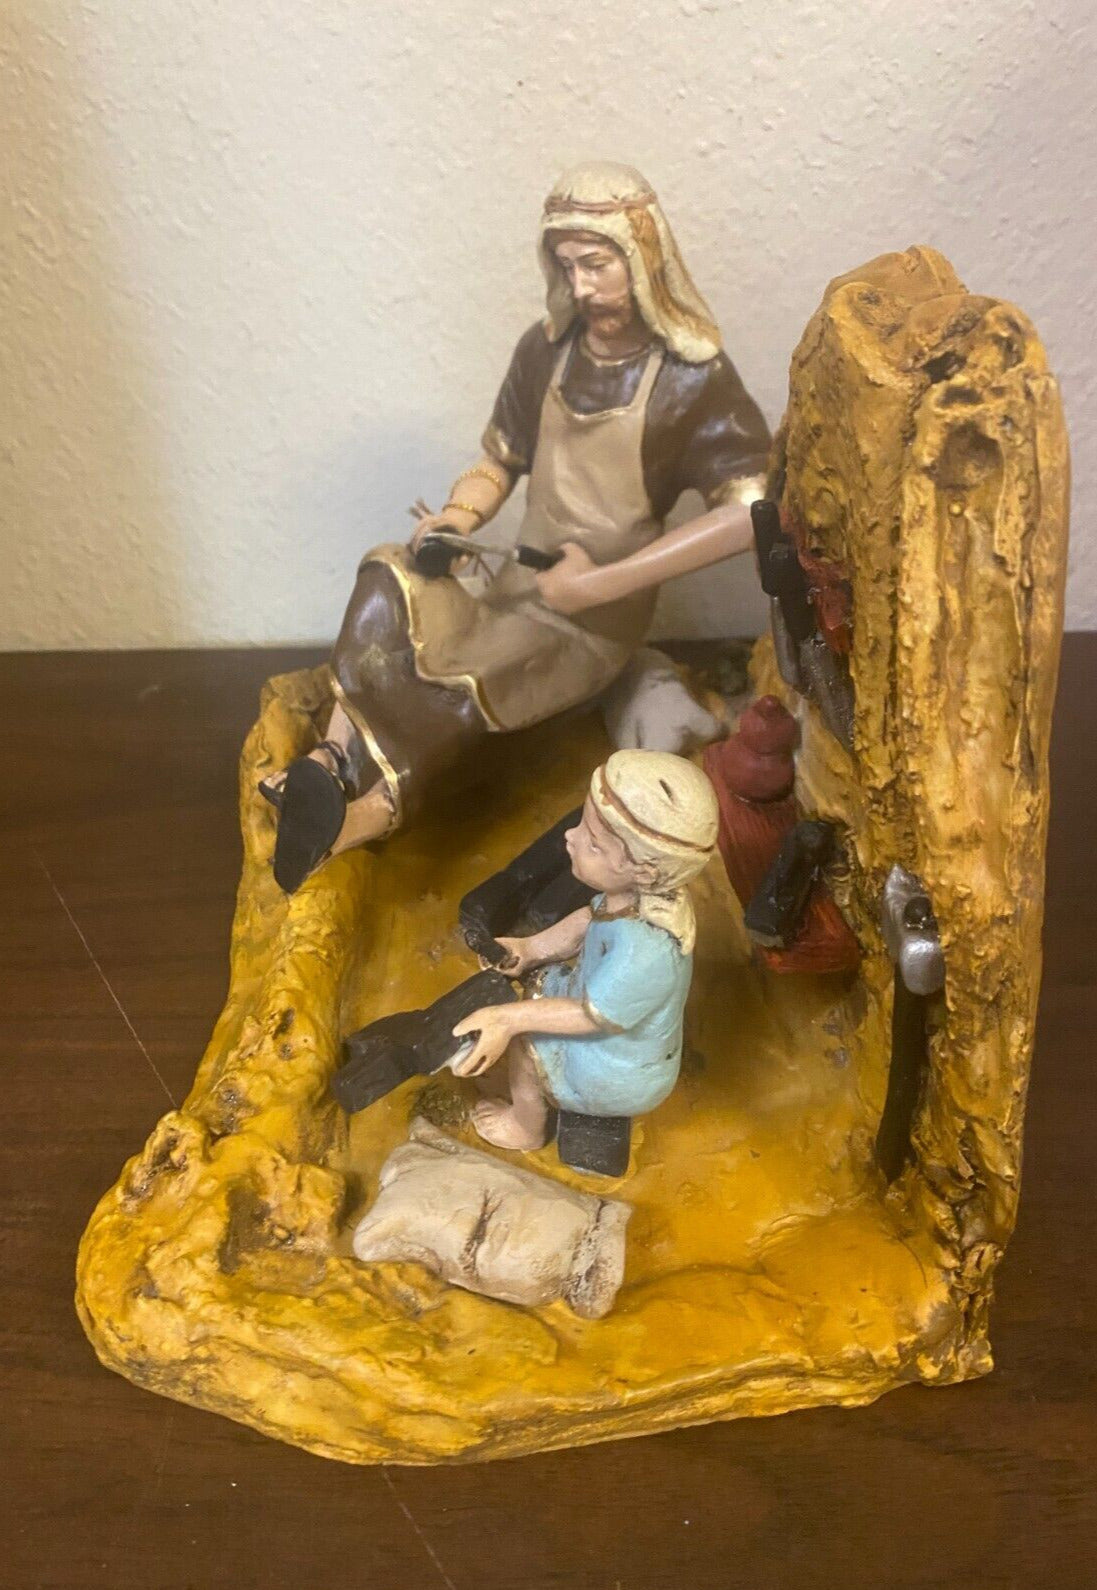 Saint Joseph the Worker with Child Jesus  New from Colombia